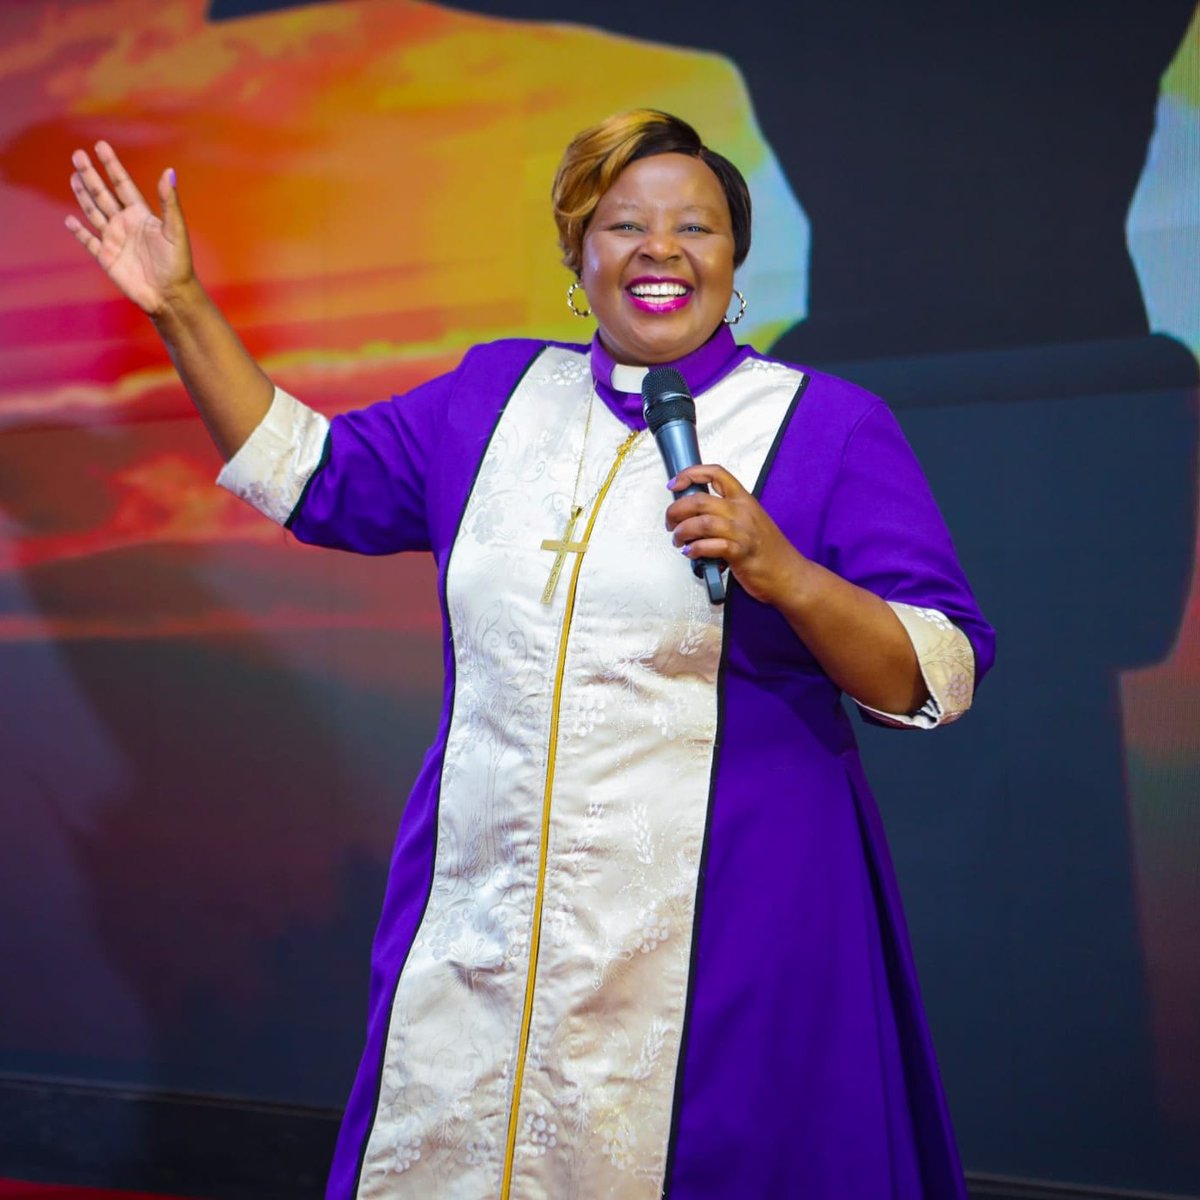 It is now 21 Years since I was ordained as a Bishop in the service of Christ. Join me today in thanking God for His mercy and faithfulness. I also thank each and everyone of you for making this journey very memorable. 

The Lord bless and establish you forever!
#21stAnniversary